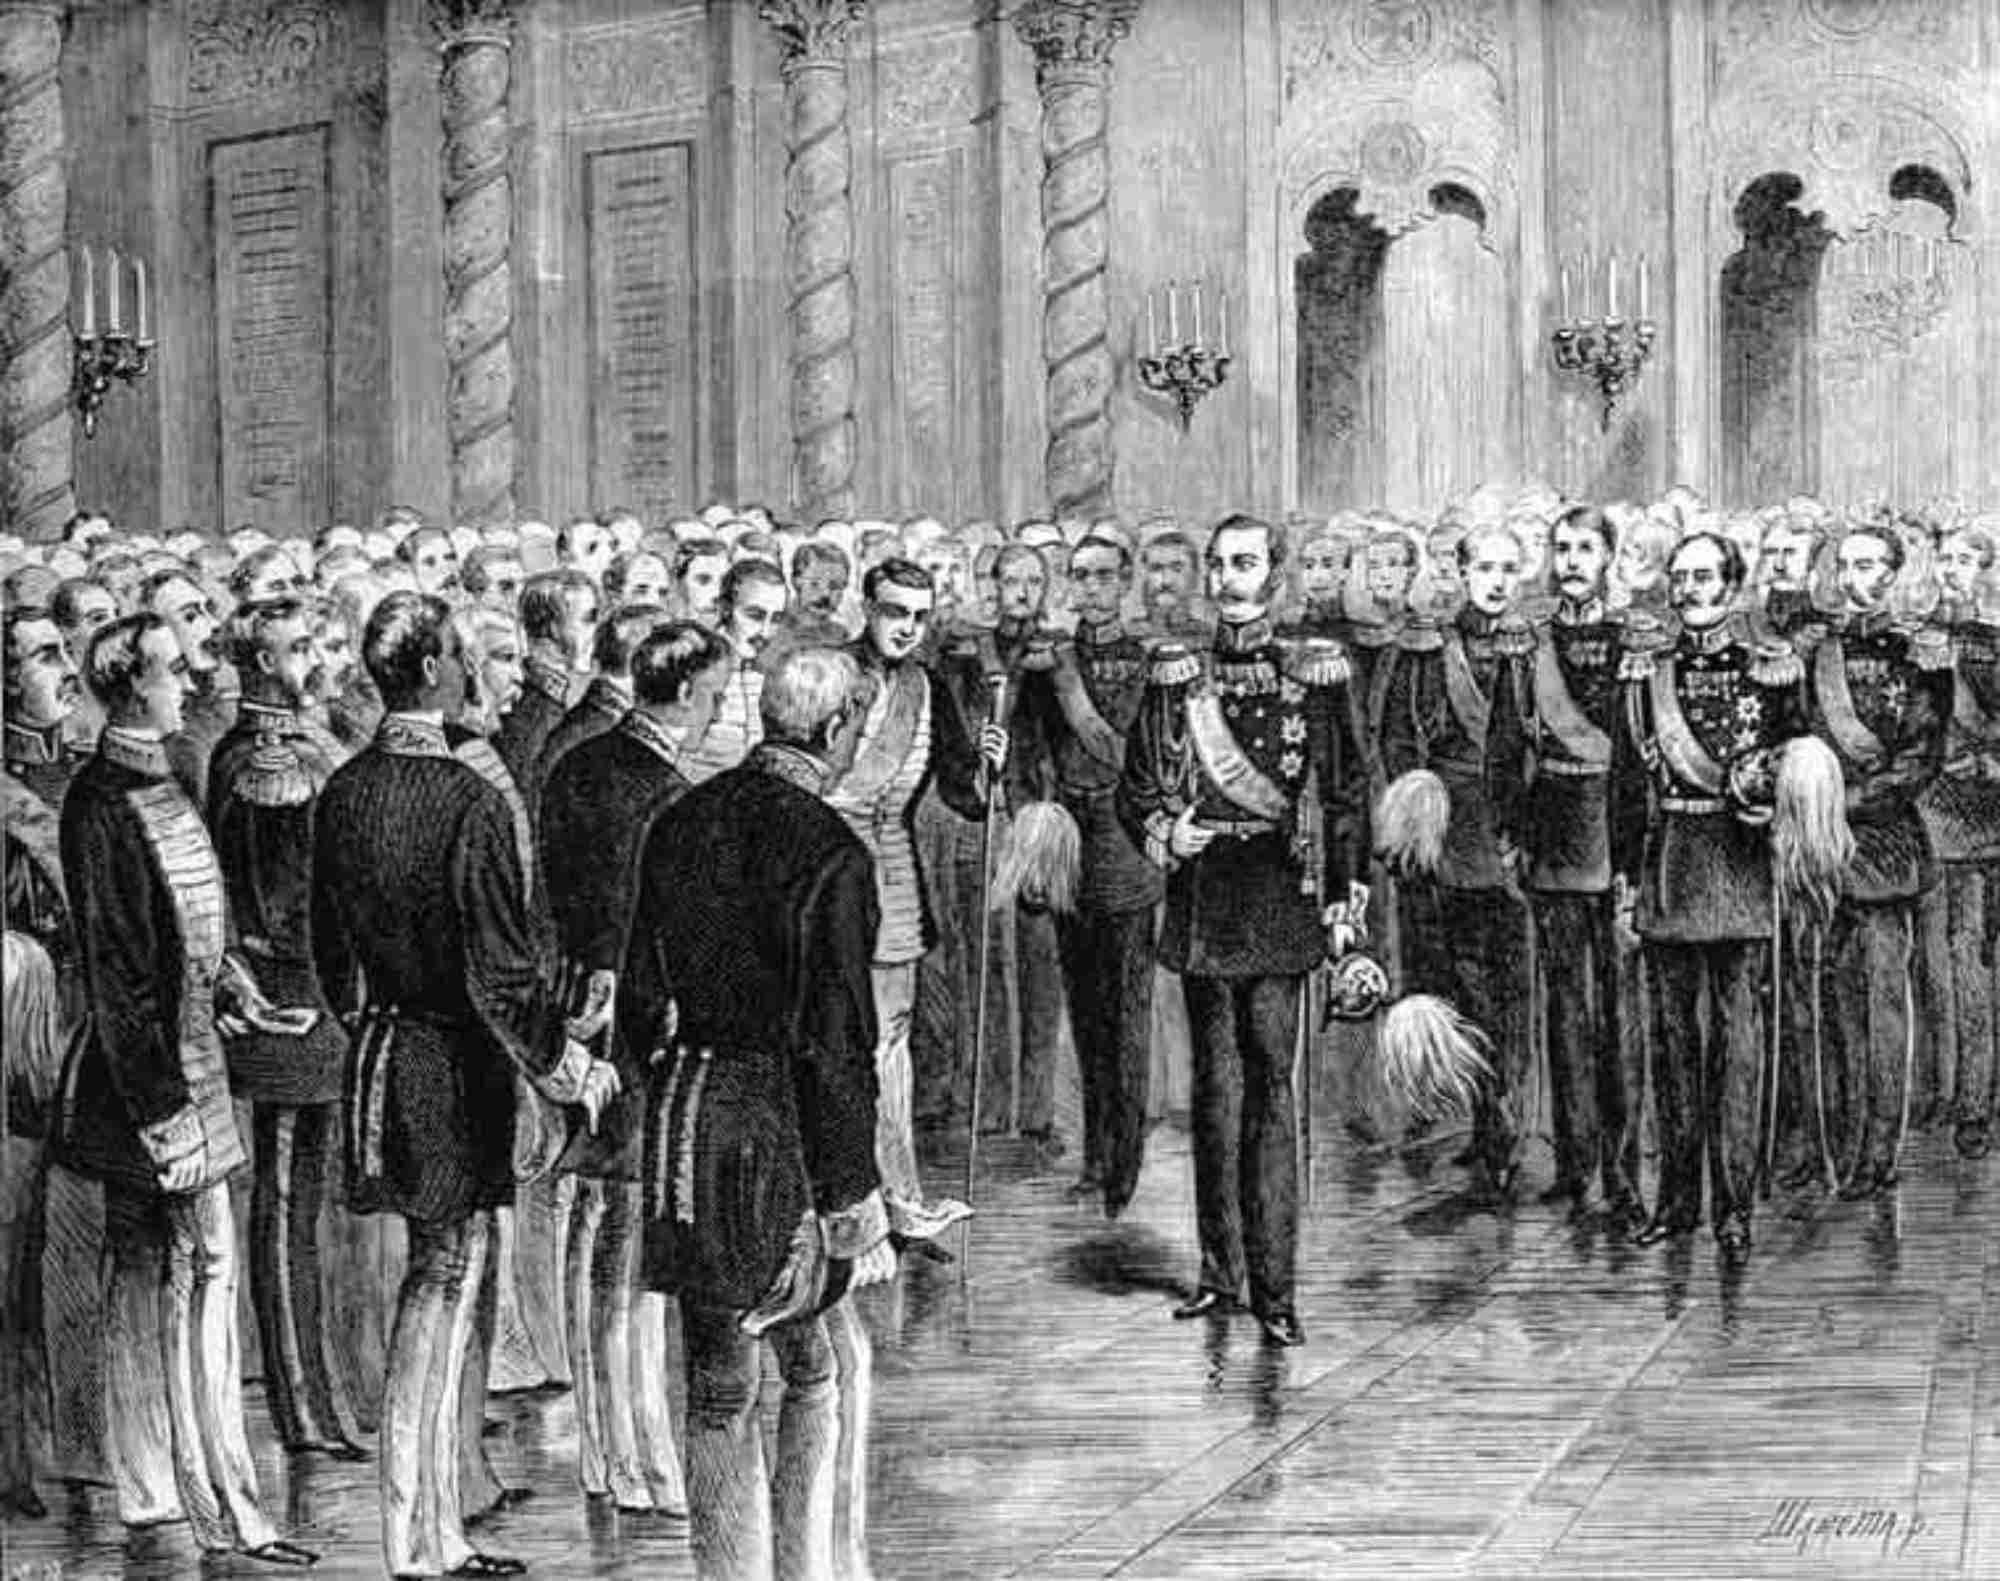 Engraving Alexander II surrounded by the Moscow noblemen to begin liberation of peasantry in 1857, as a result of opposition movements.